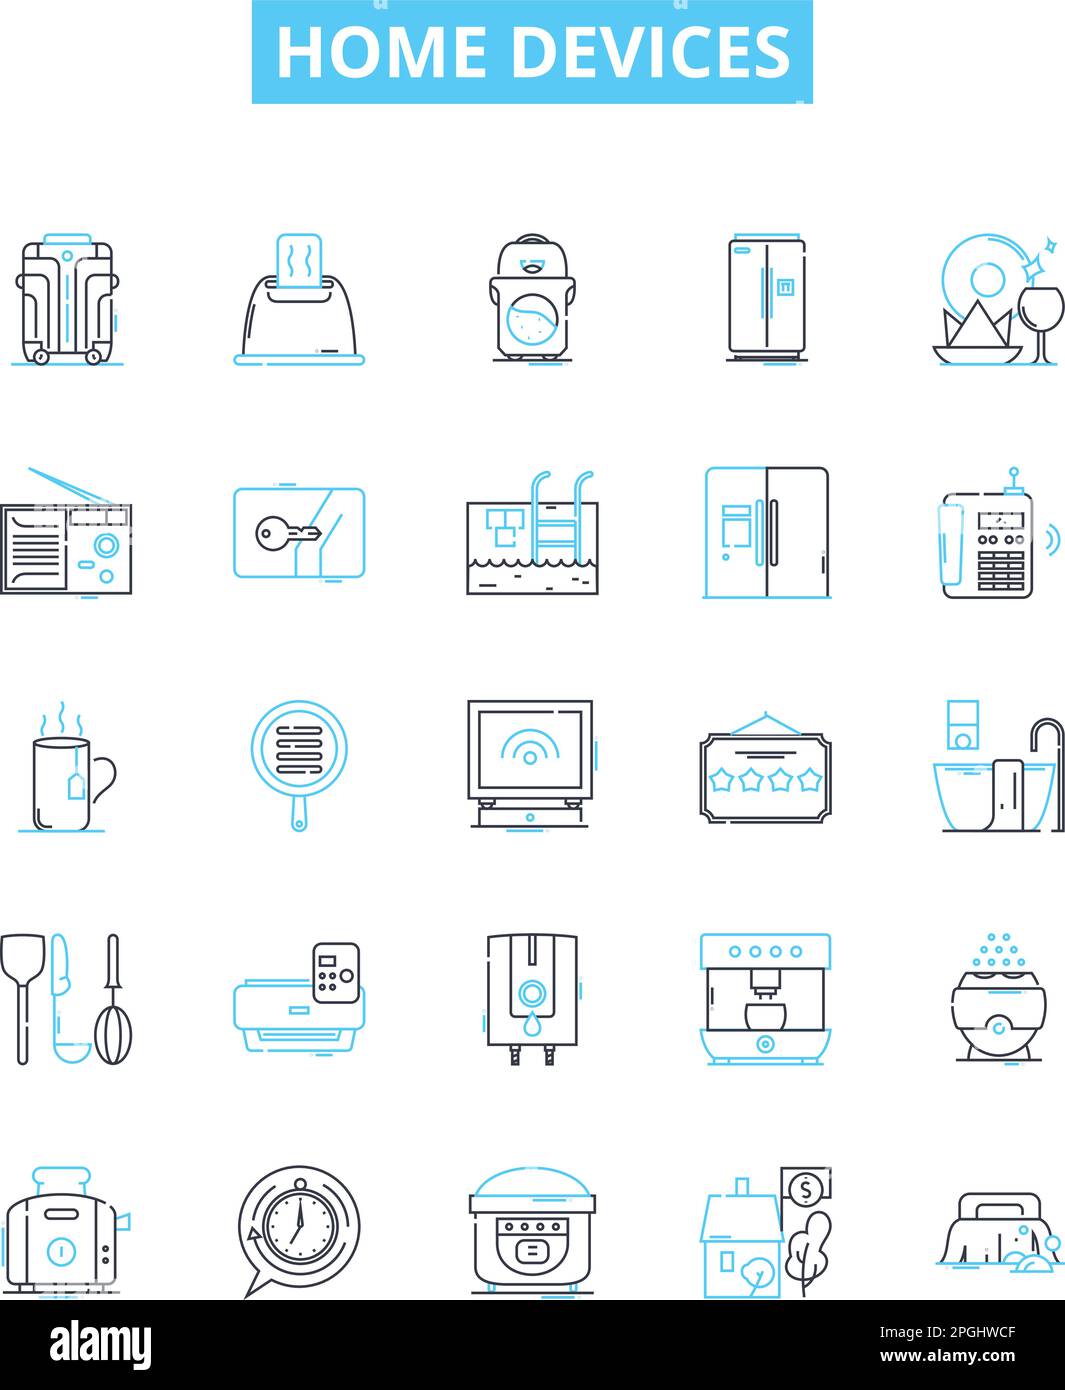 Home devices vector line icons set. Appliances, Electronics, Television, Refrigerator, Computer, Lights, Heater illustration outline concept symbols Stock Vector